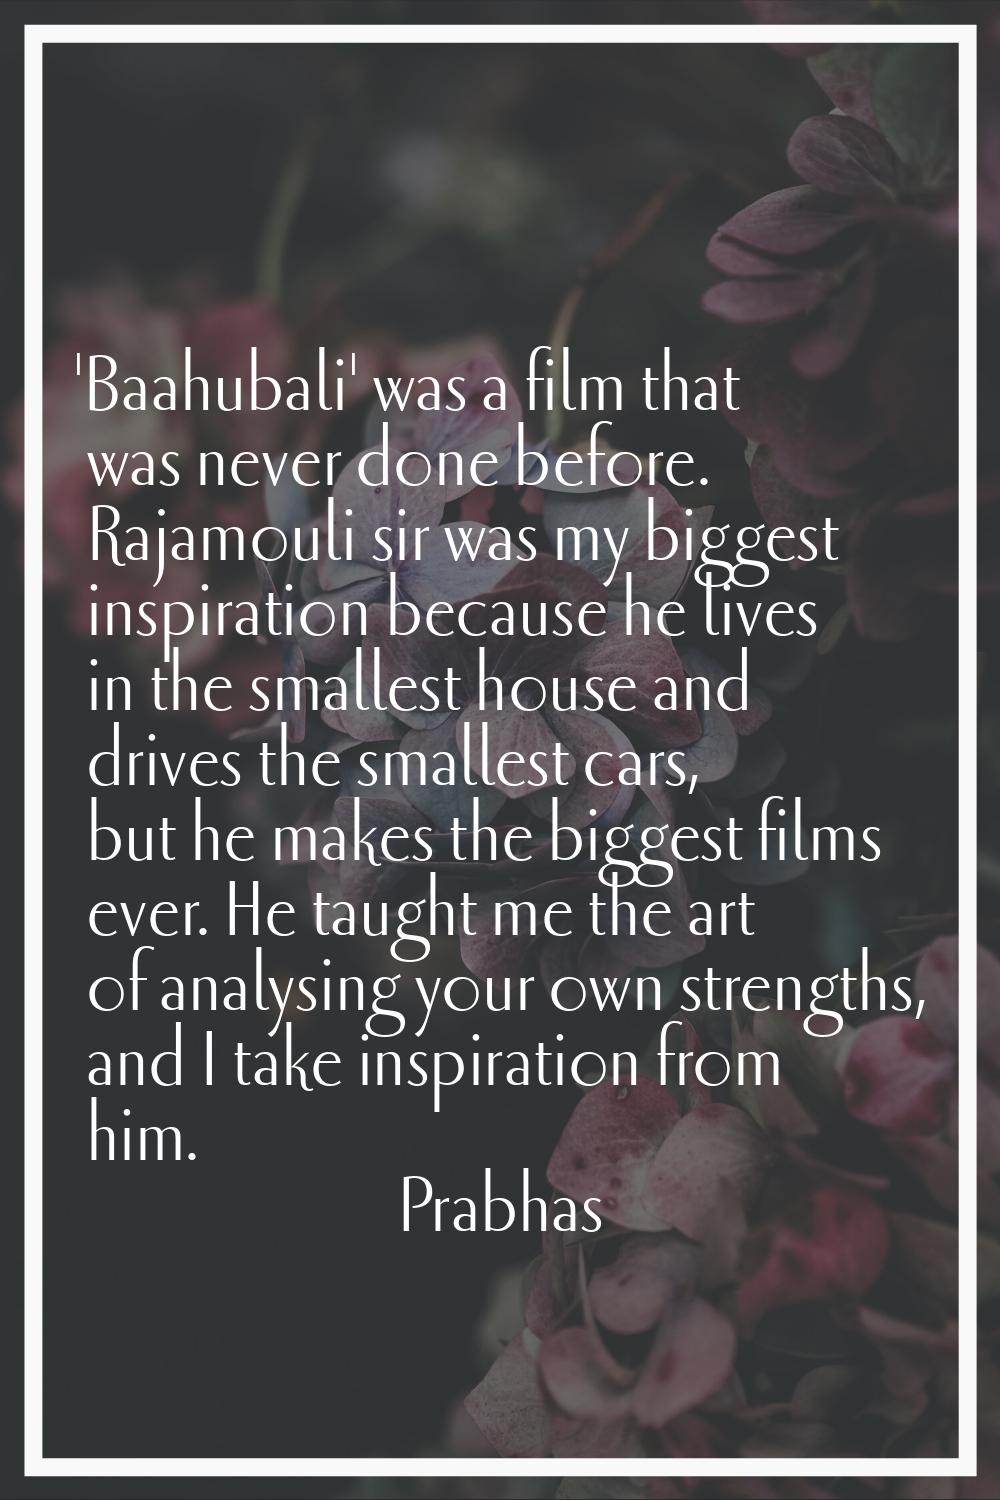 'Baahubali' was a film that was never done before. Rajamouli sir was my biggest inspiration because